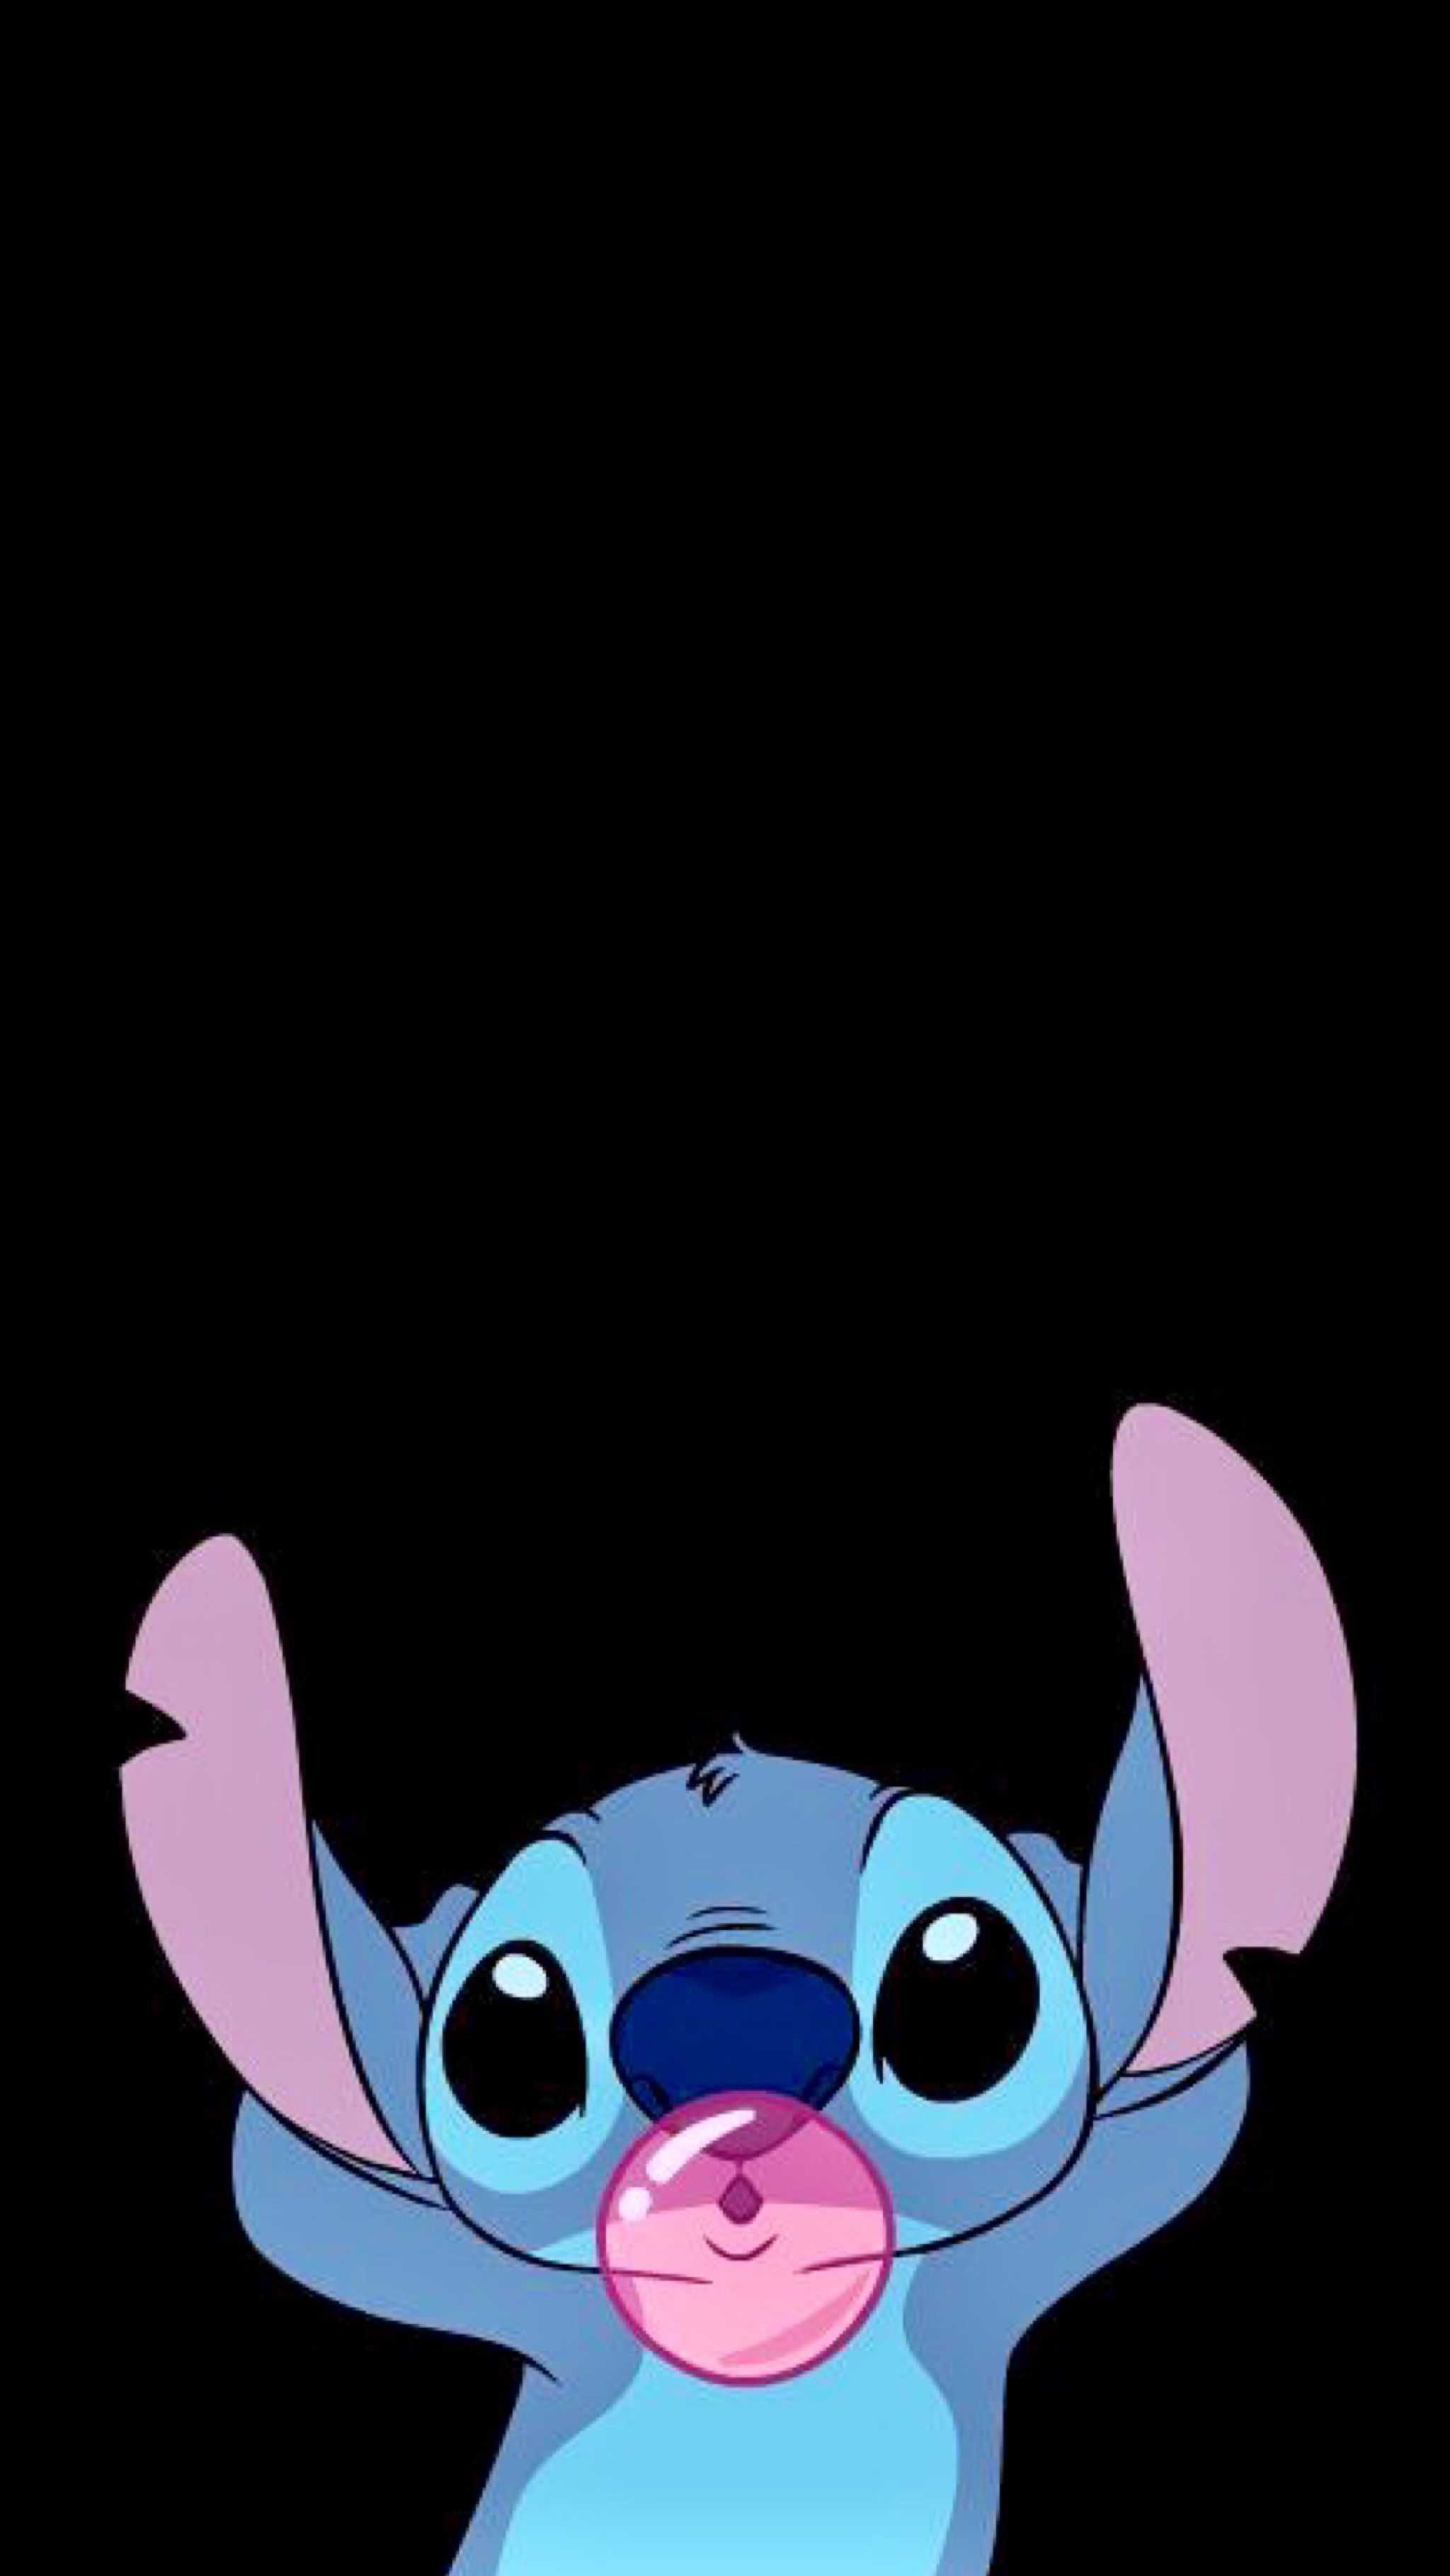 Stitch the little girl with a pink pacifier - Stitch